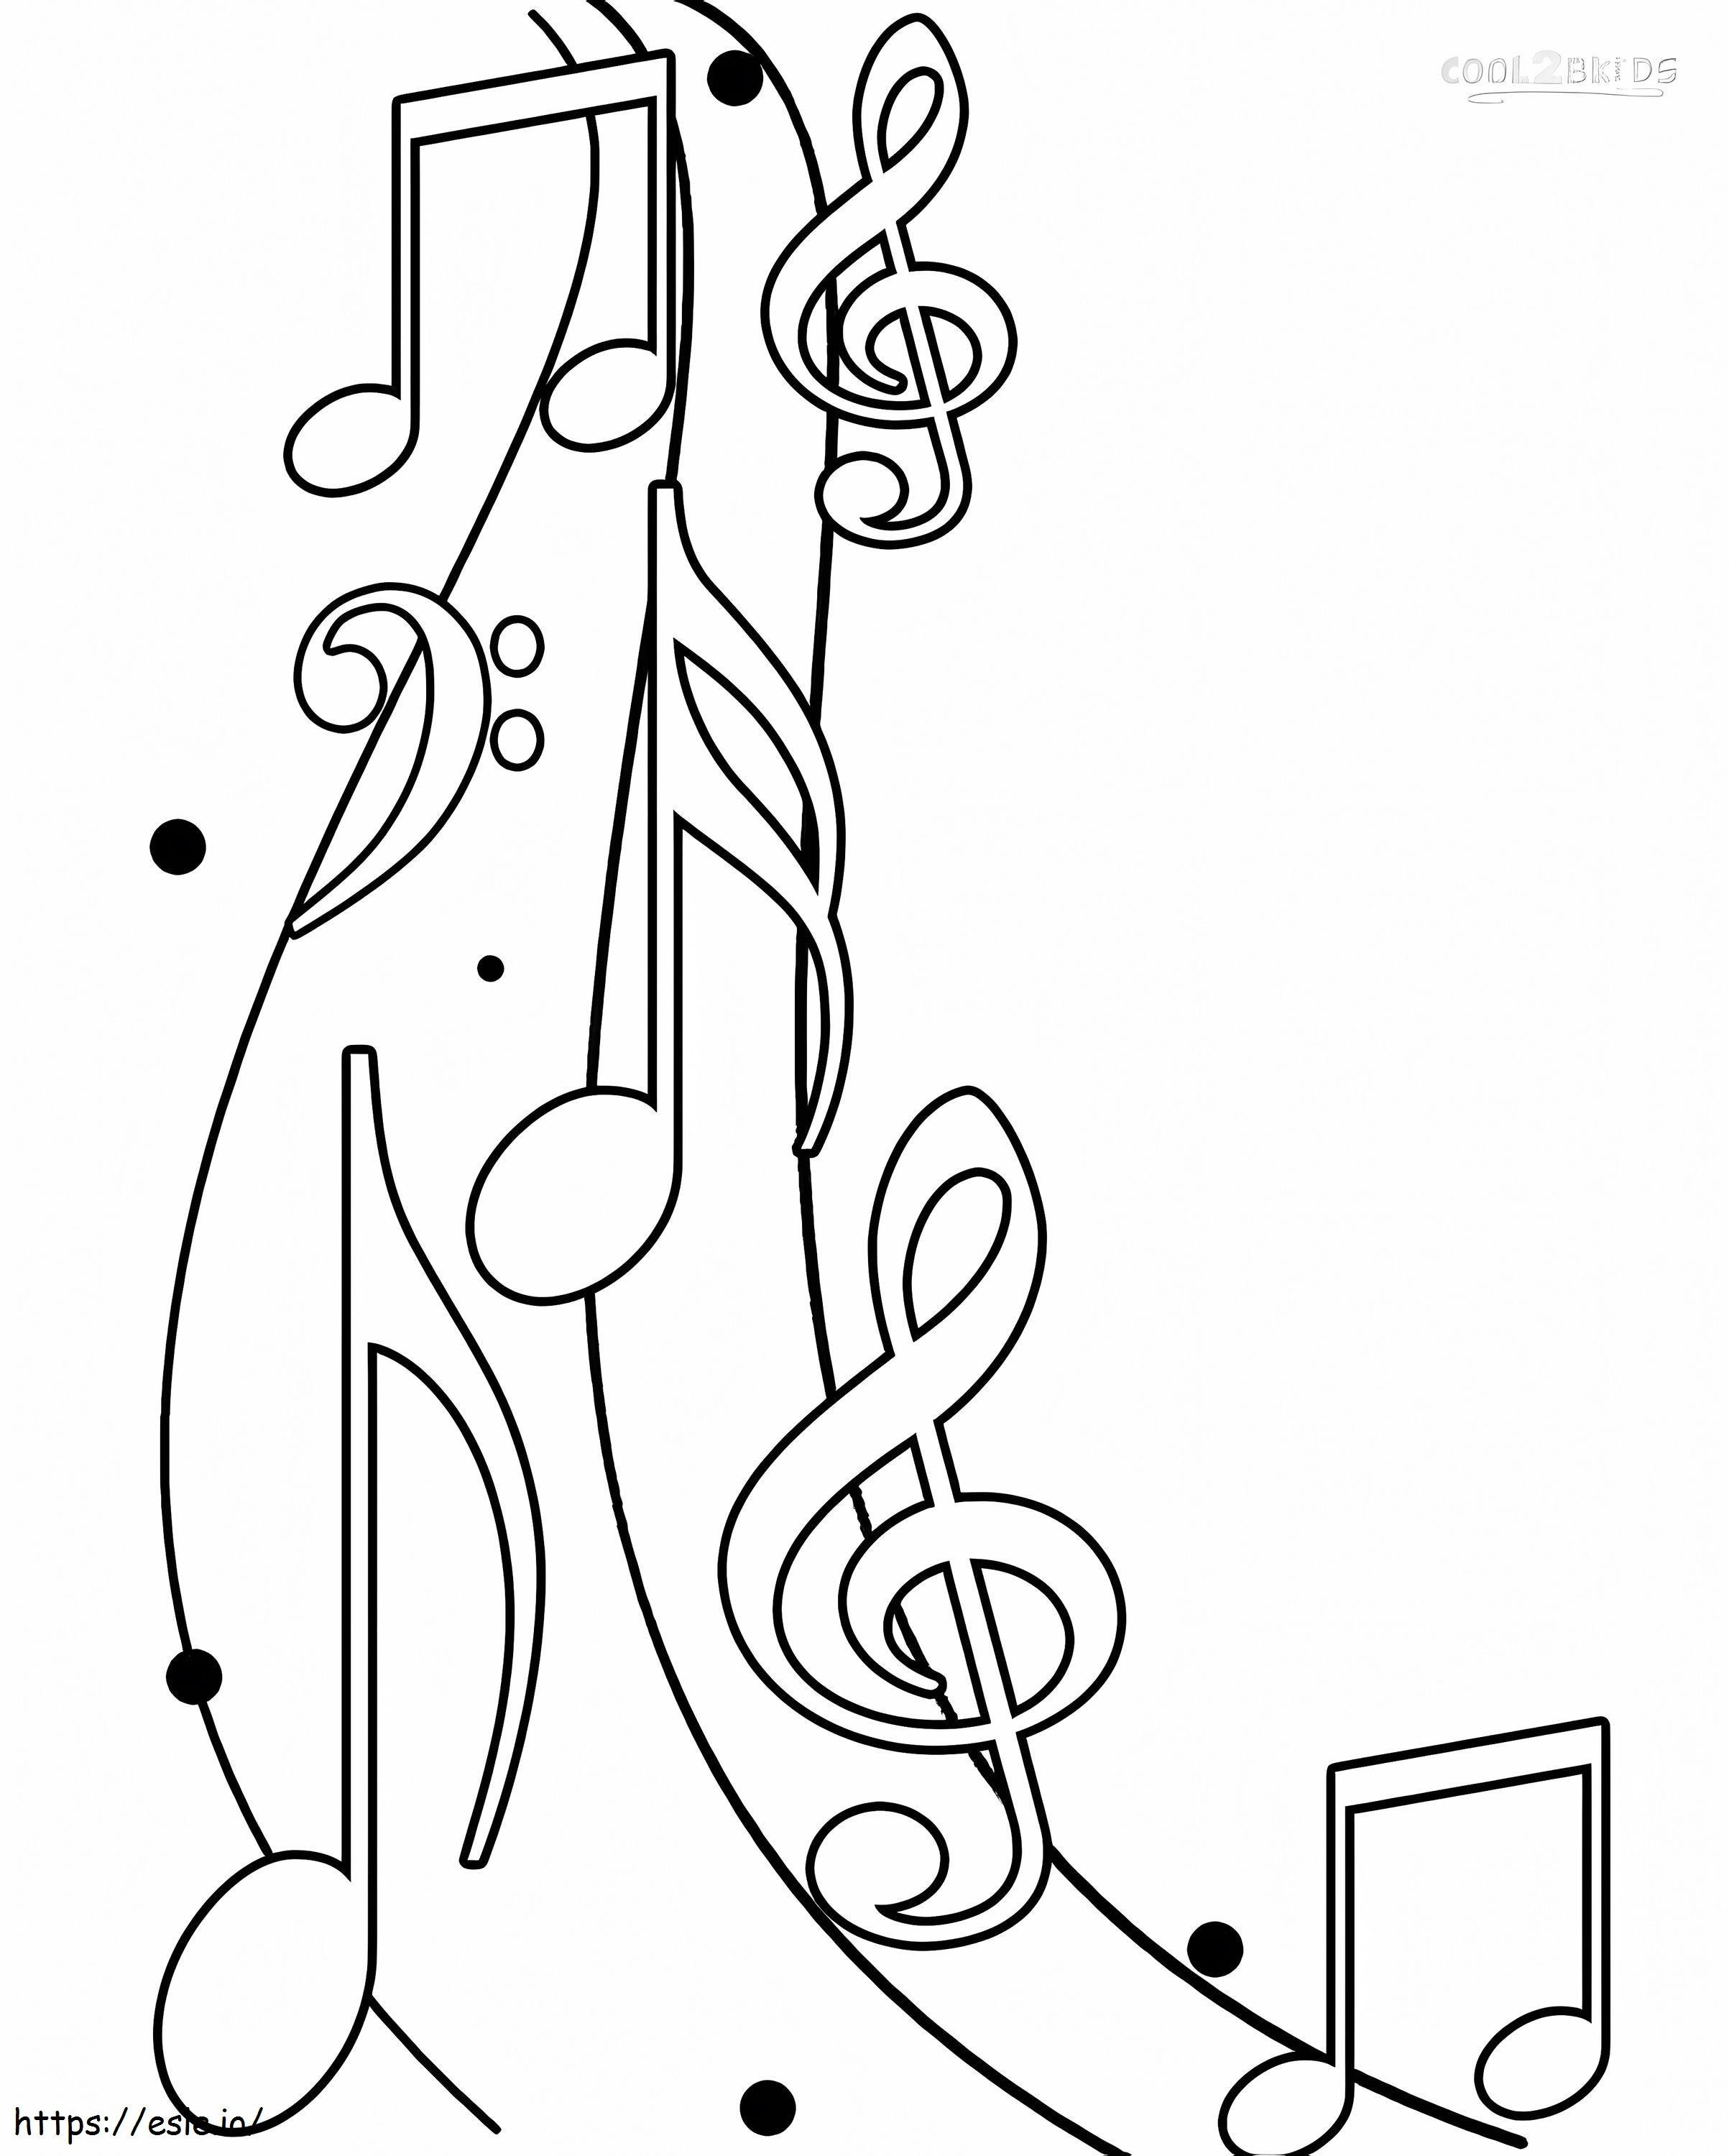 Music Notes 5 coloring page